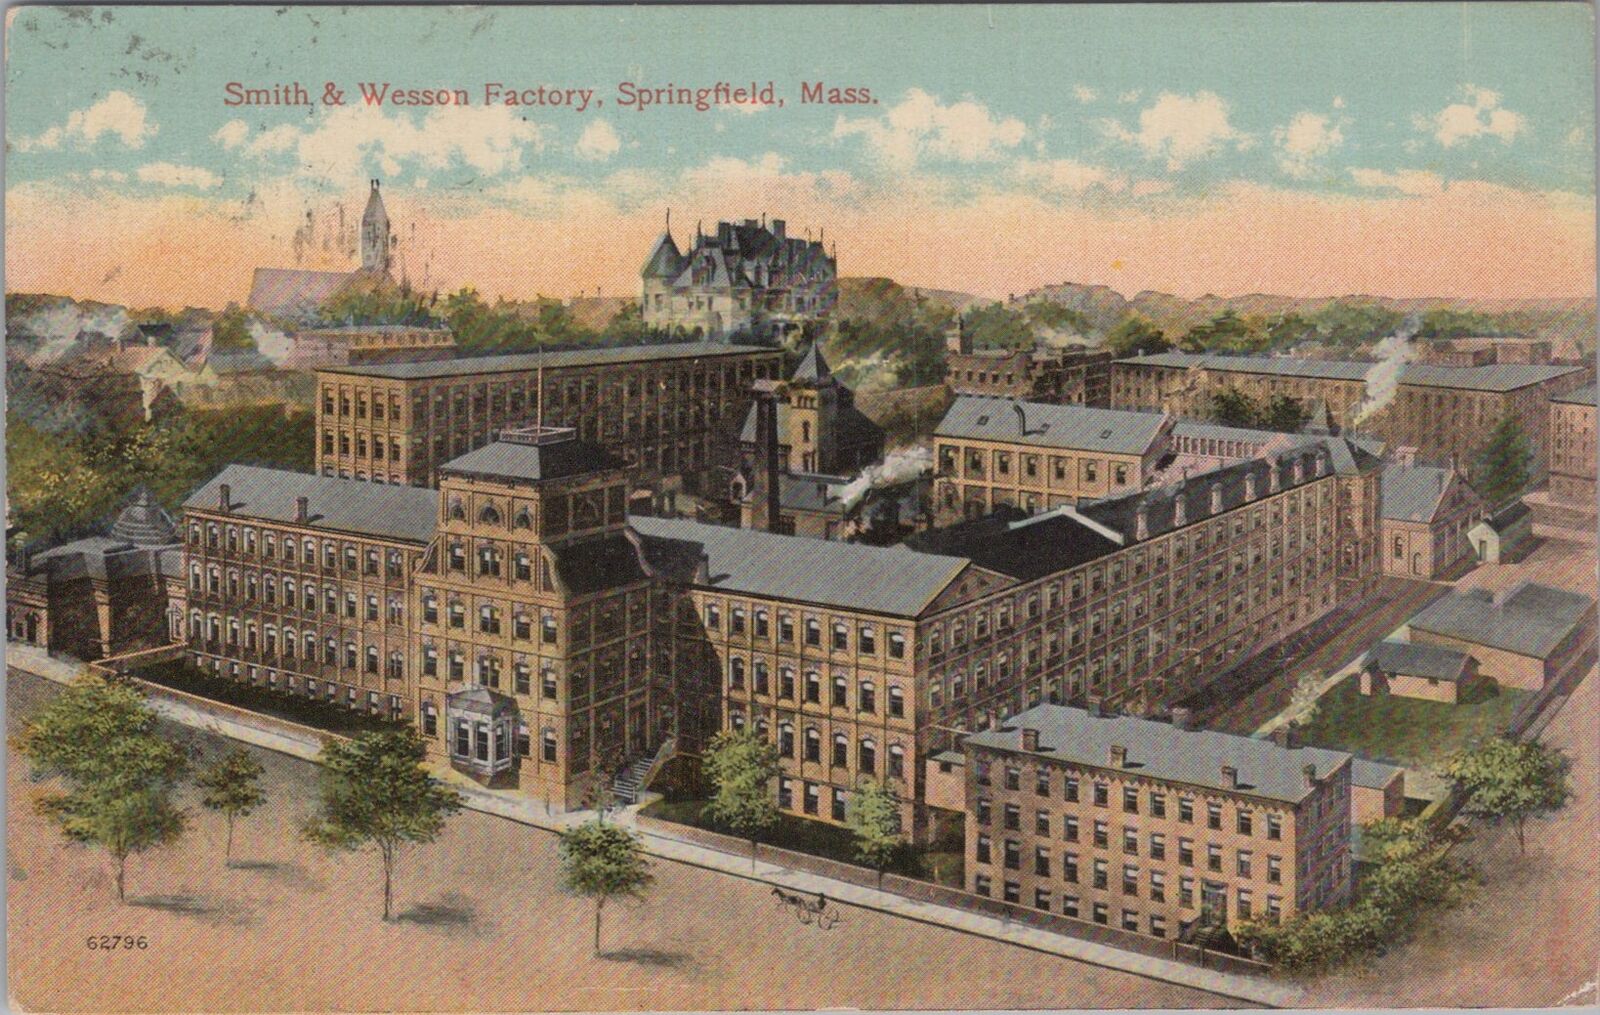 Smith & Wesson Factory, Springfield Massachusetts 1910s Postcard